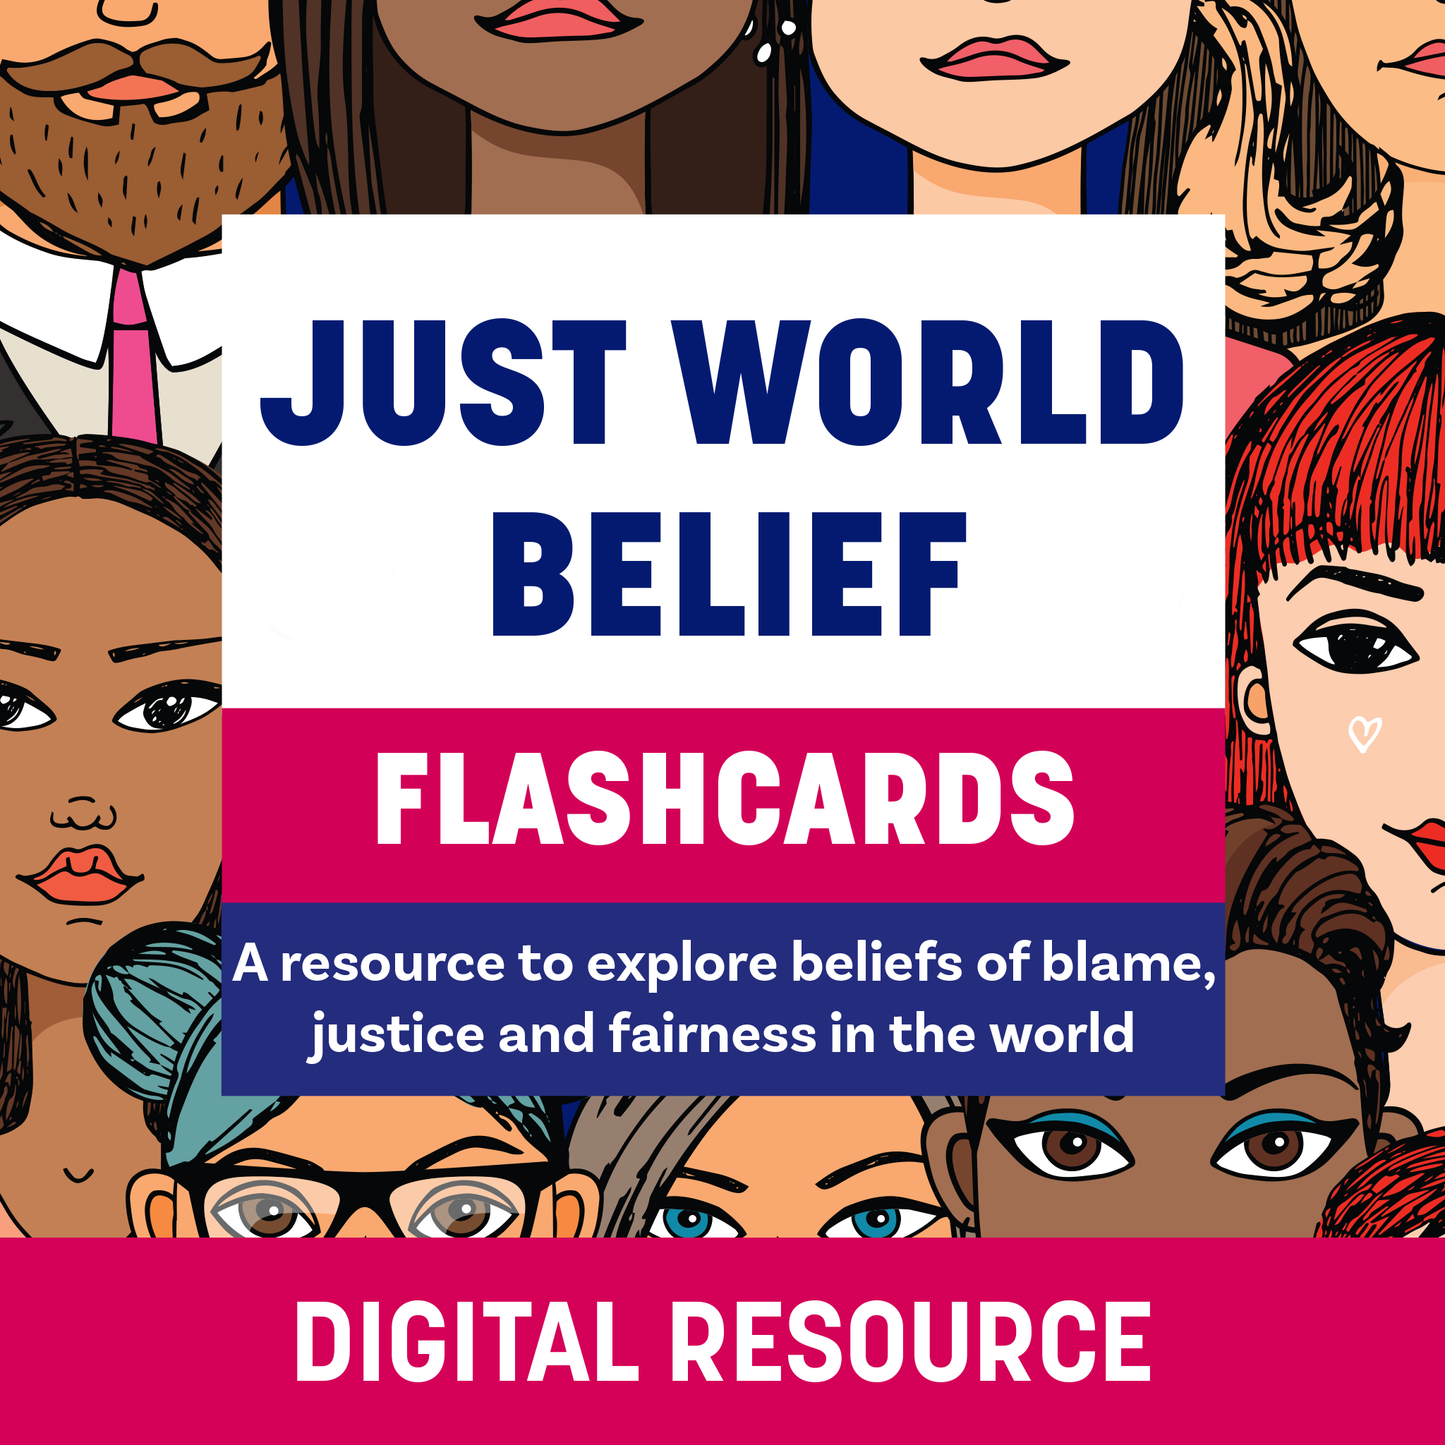 Just World Belief - Digital Flashcards and Resource